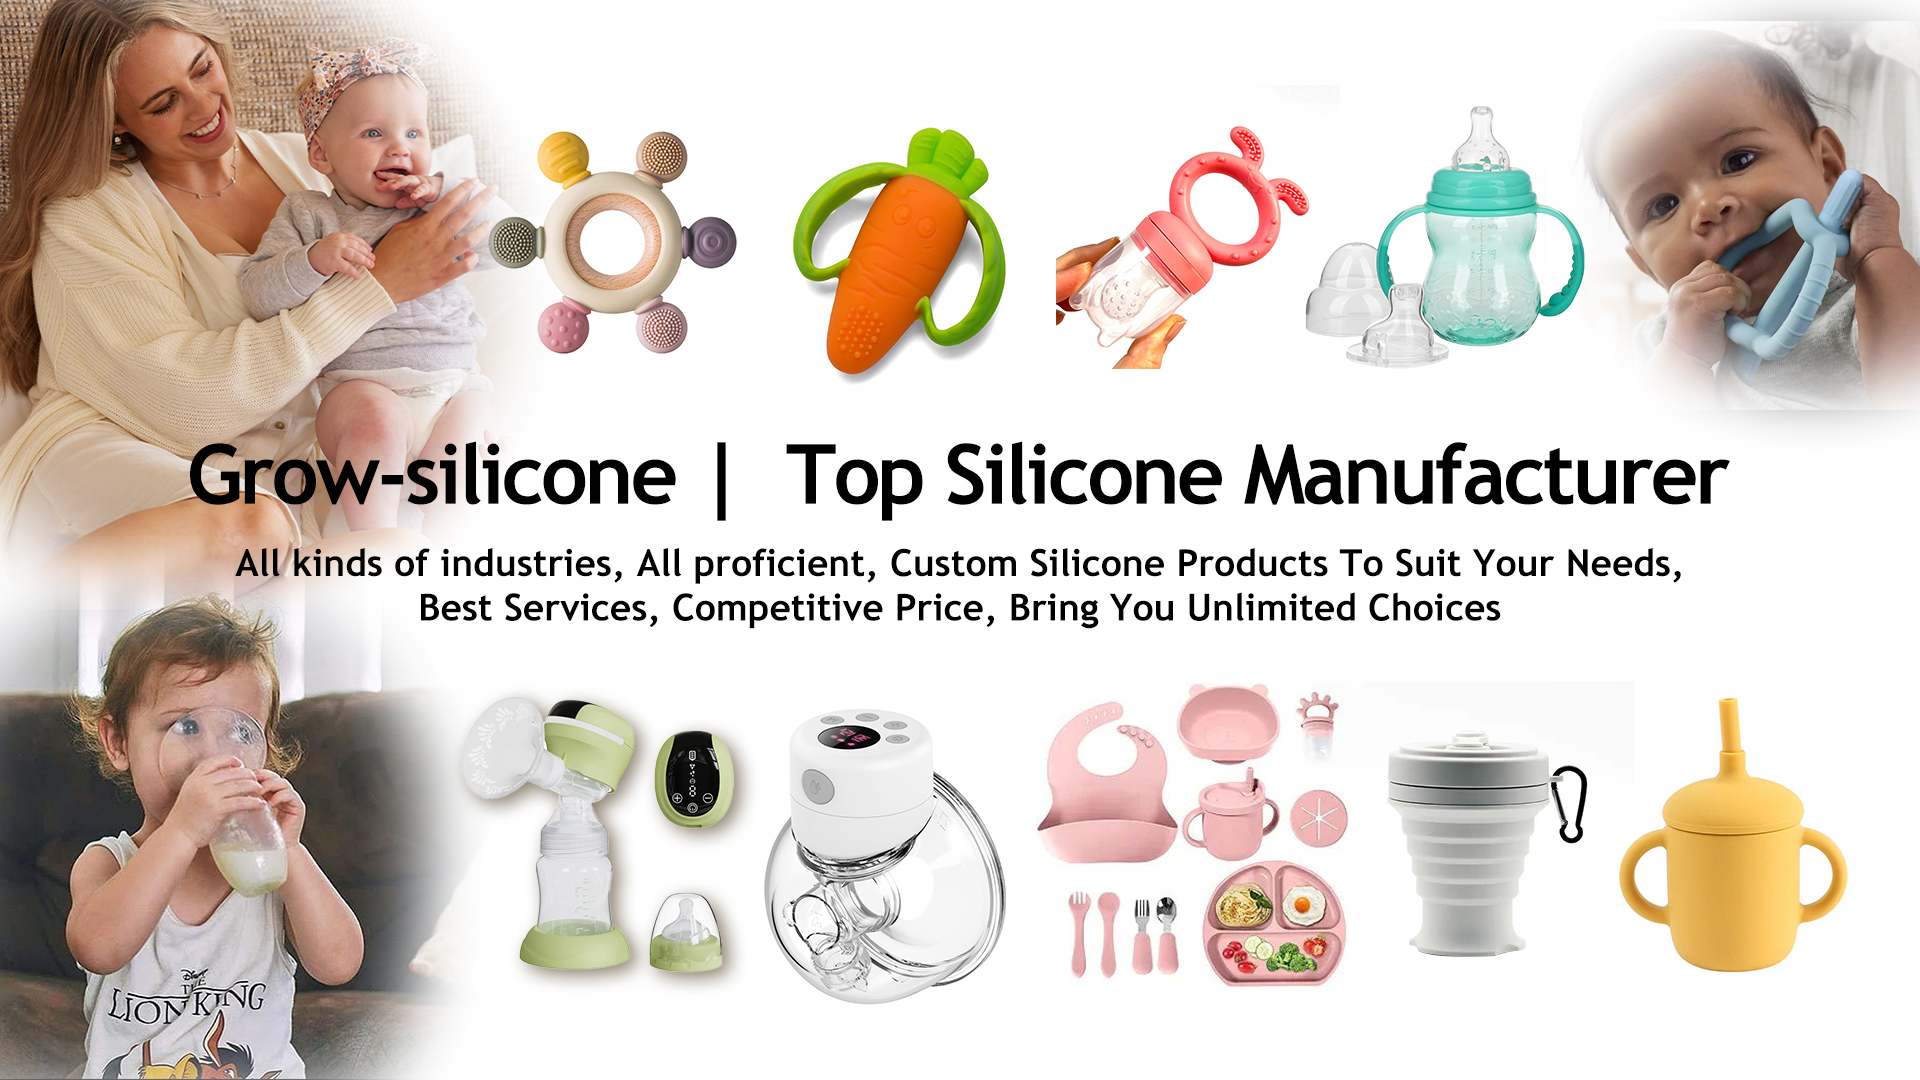 grow-silicone manufacturers